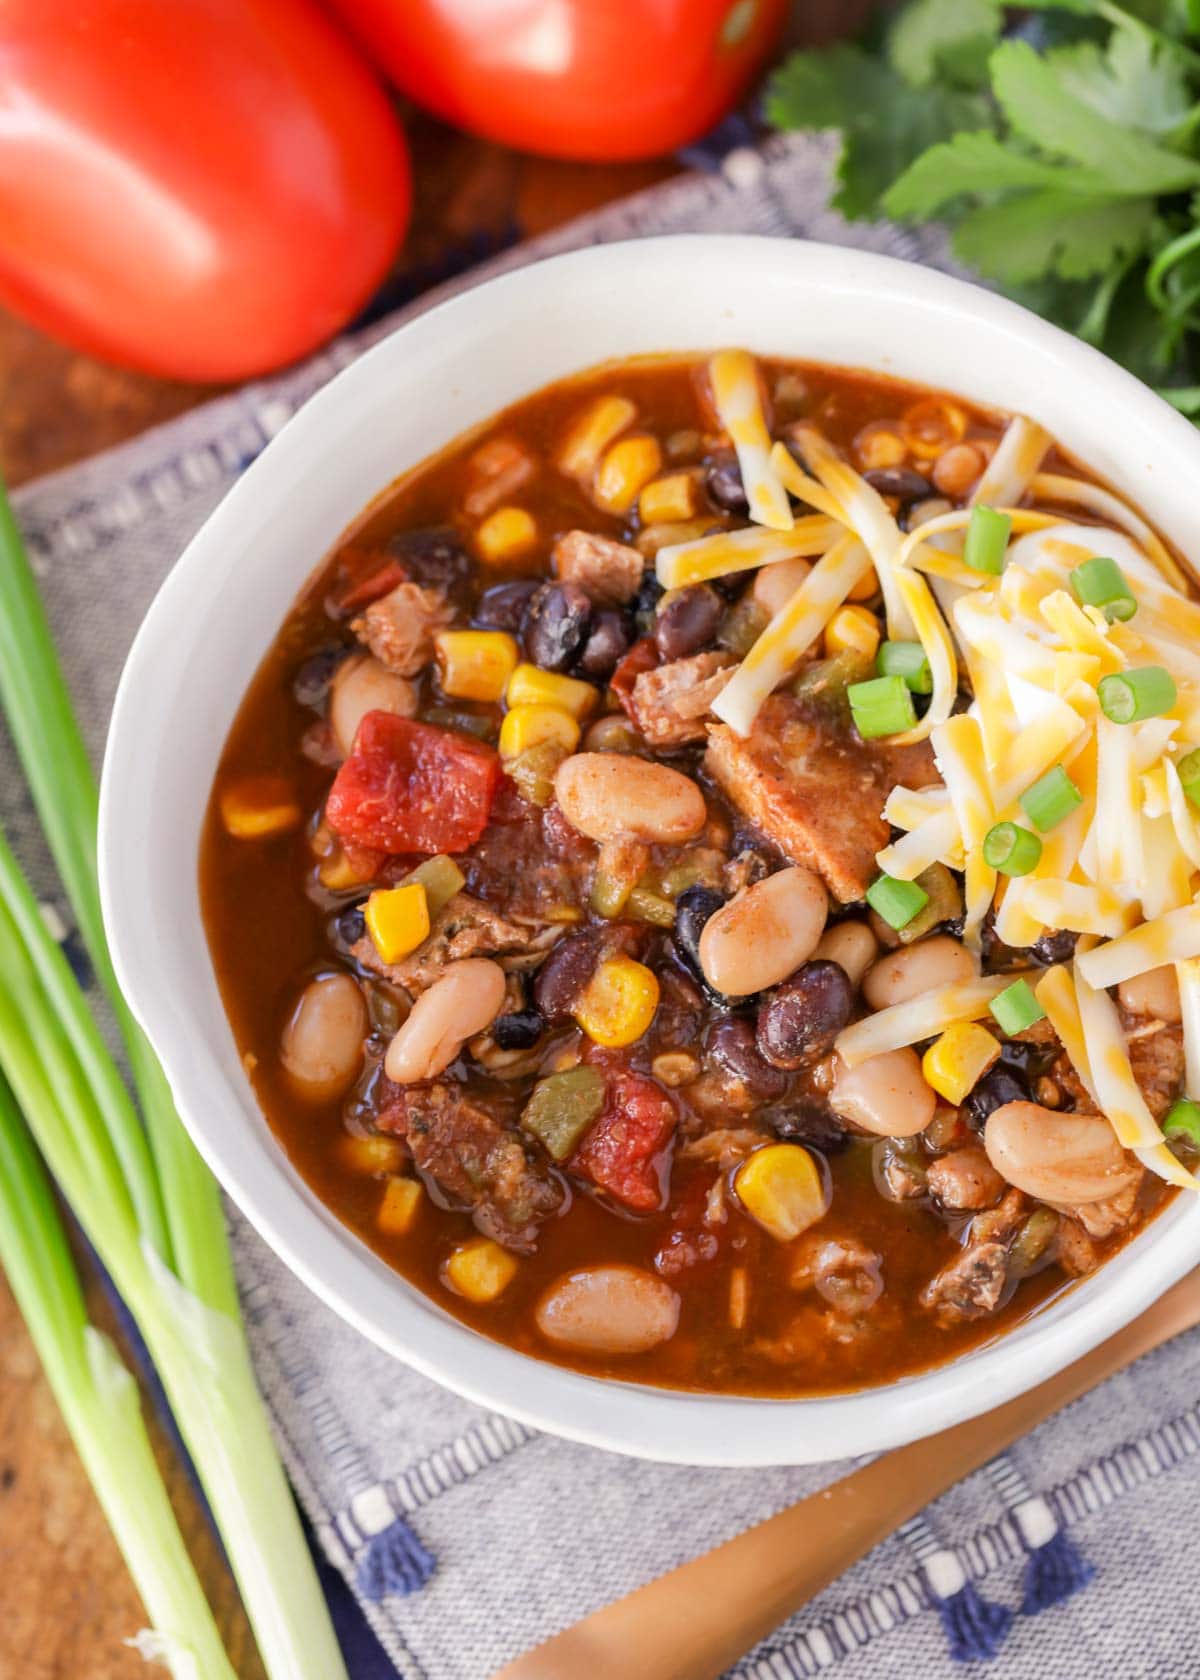 Slow cooker turkey chili in a white bowl.